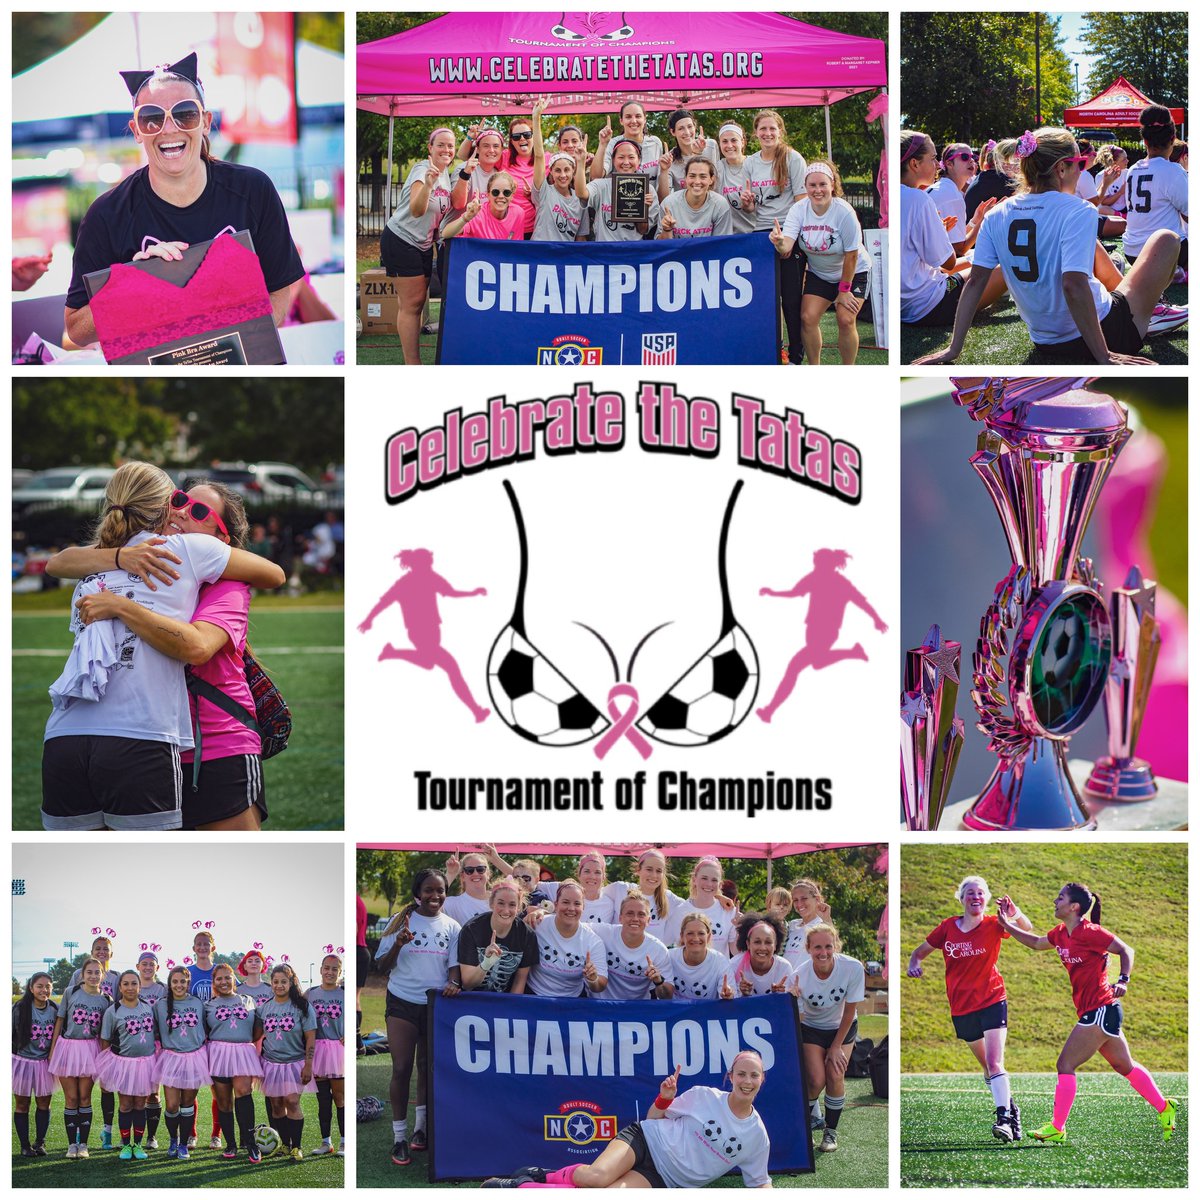 EXCITING NEWS!! 200+ women players competed in NCASA's Celebrate the Tatas Tournament of Champions Oct 15 & 16 in Huntersville, NC raising $40k that will provide free mammograms for women in need. THANK YOU to all sponsors, donors, players, referees, volunteers, family & friends!